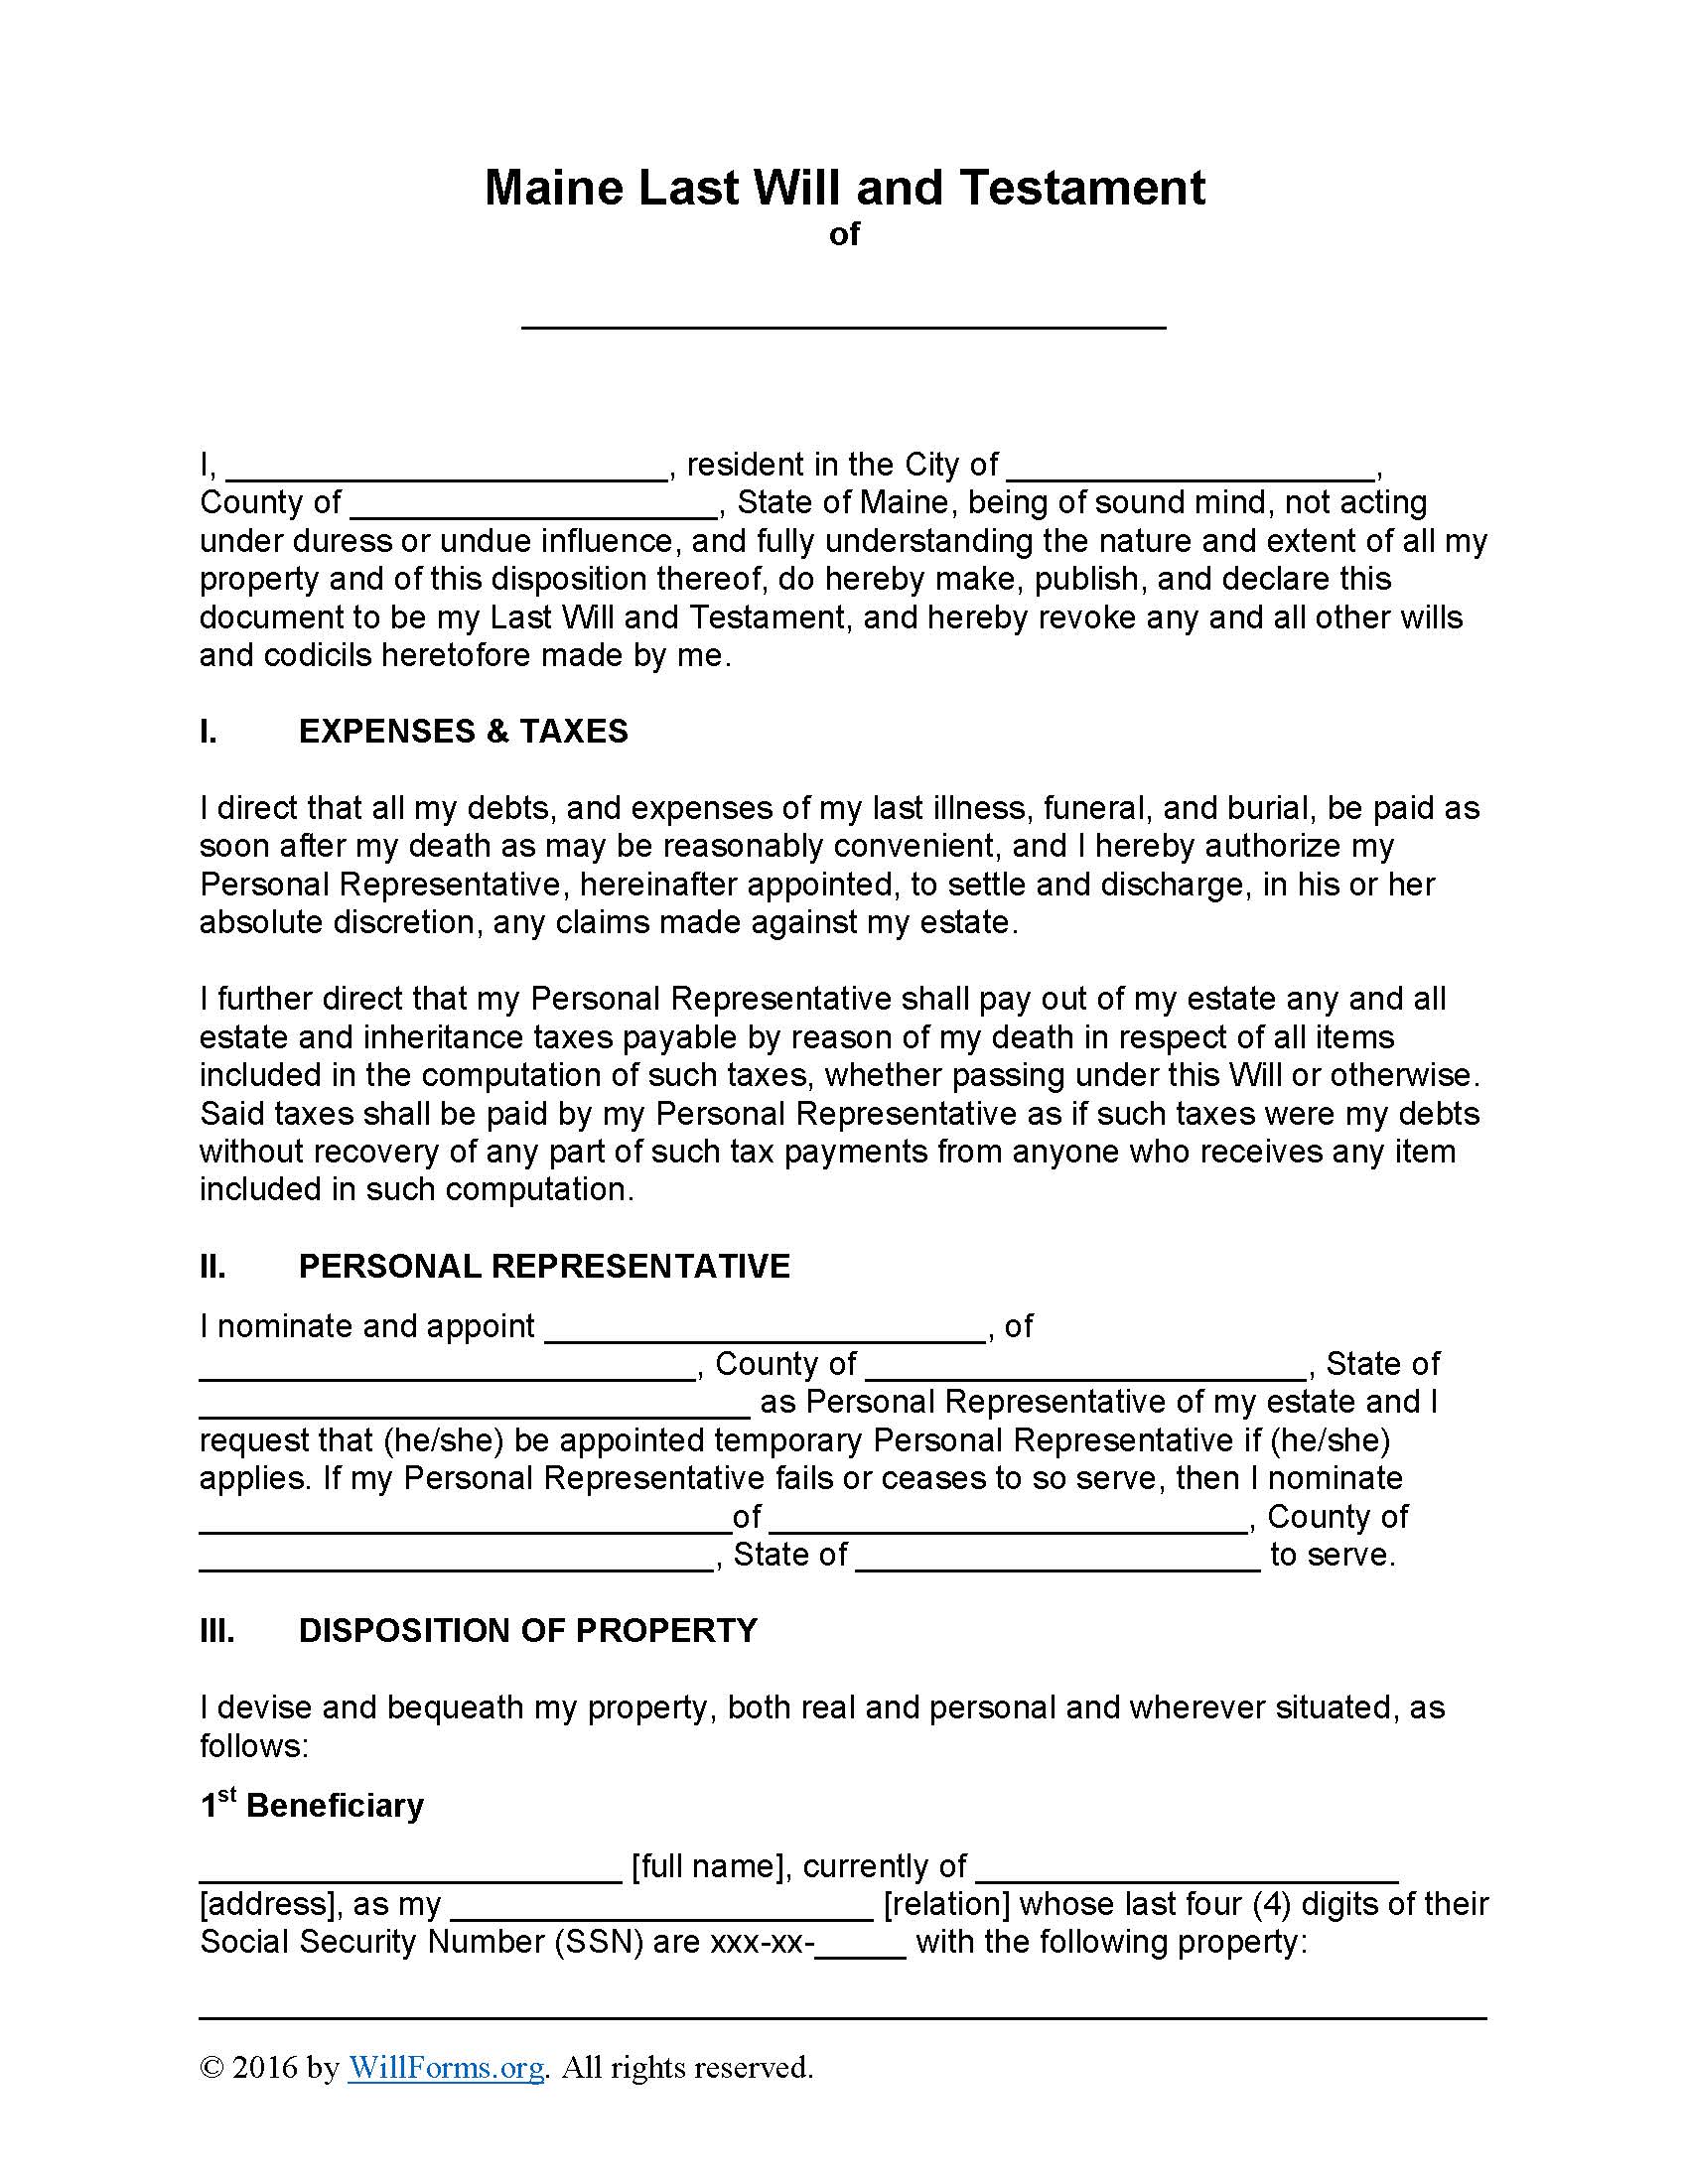 Maine Last Will and Testament Form